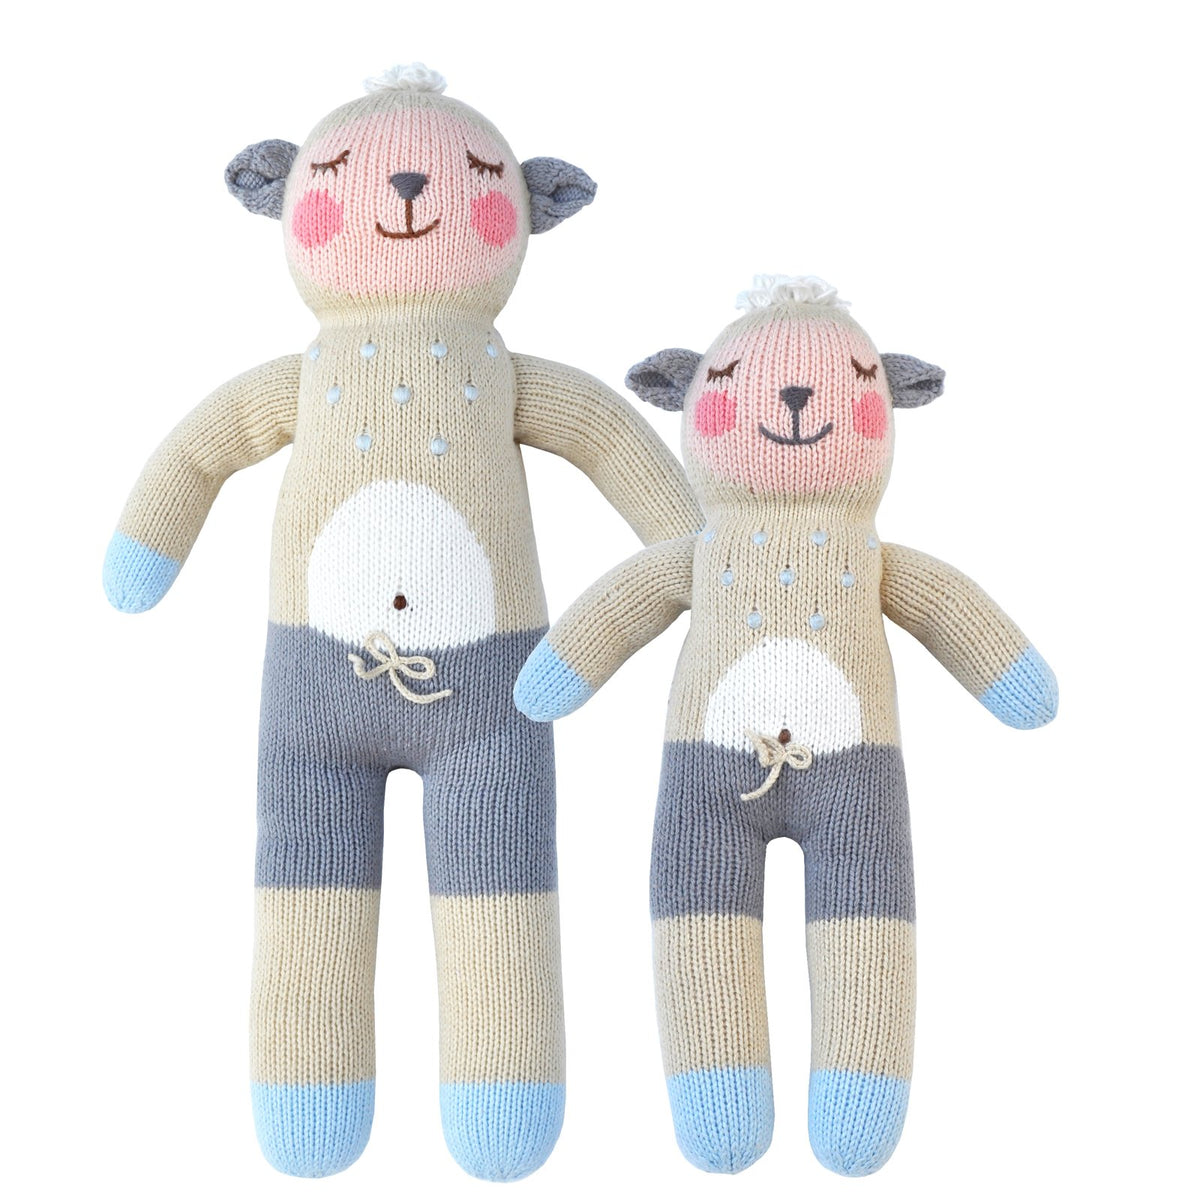 Blabla Knit Doll, Wooly the Sheep - Mini Size - oh baby!